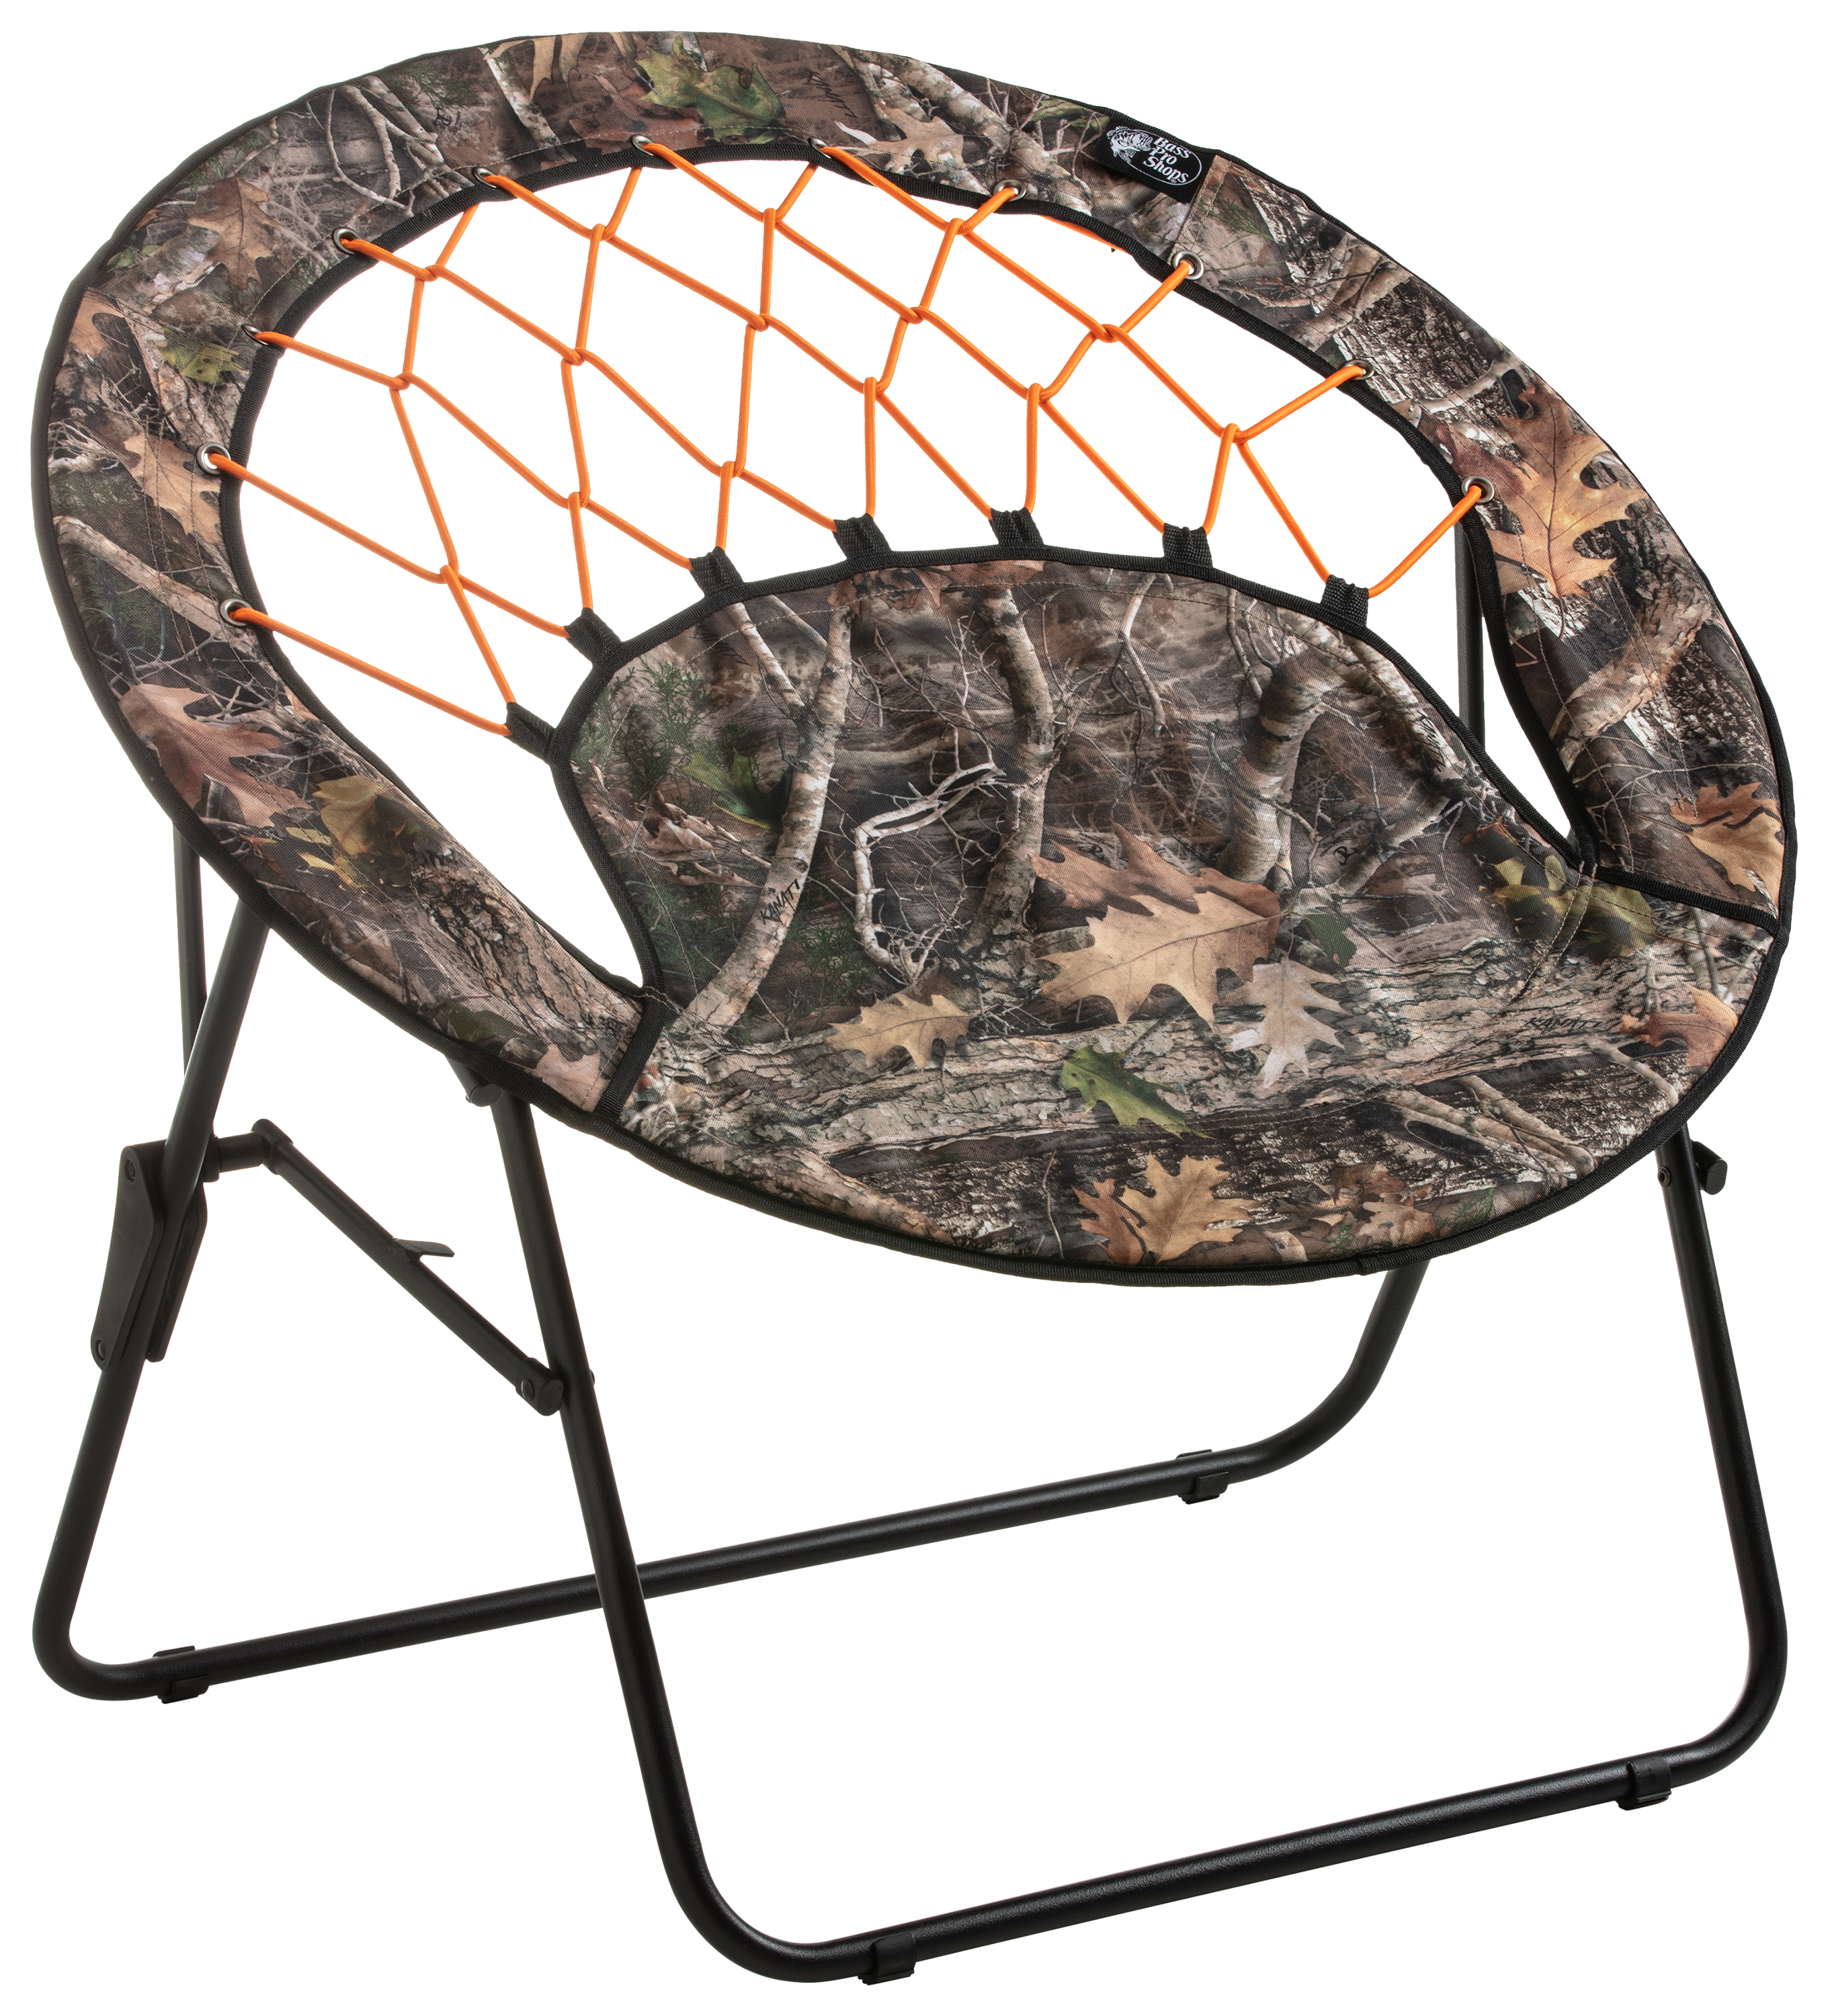  Bungee Cord Chair